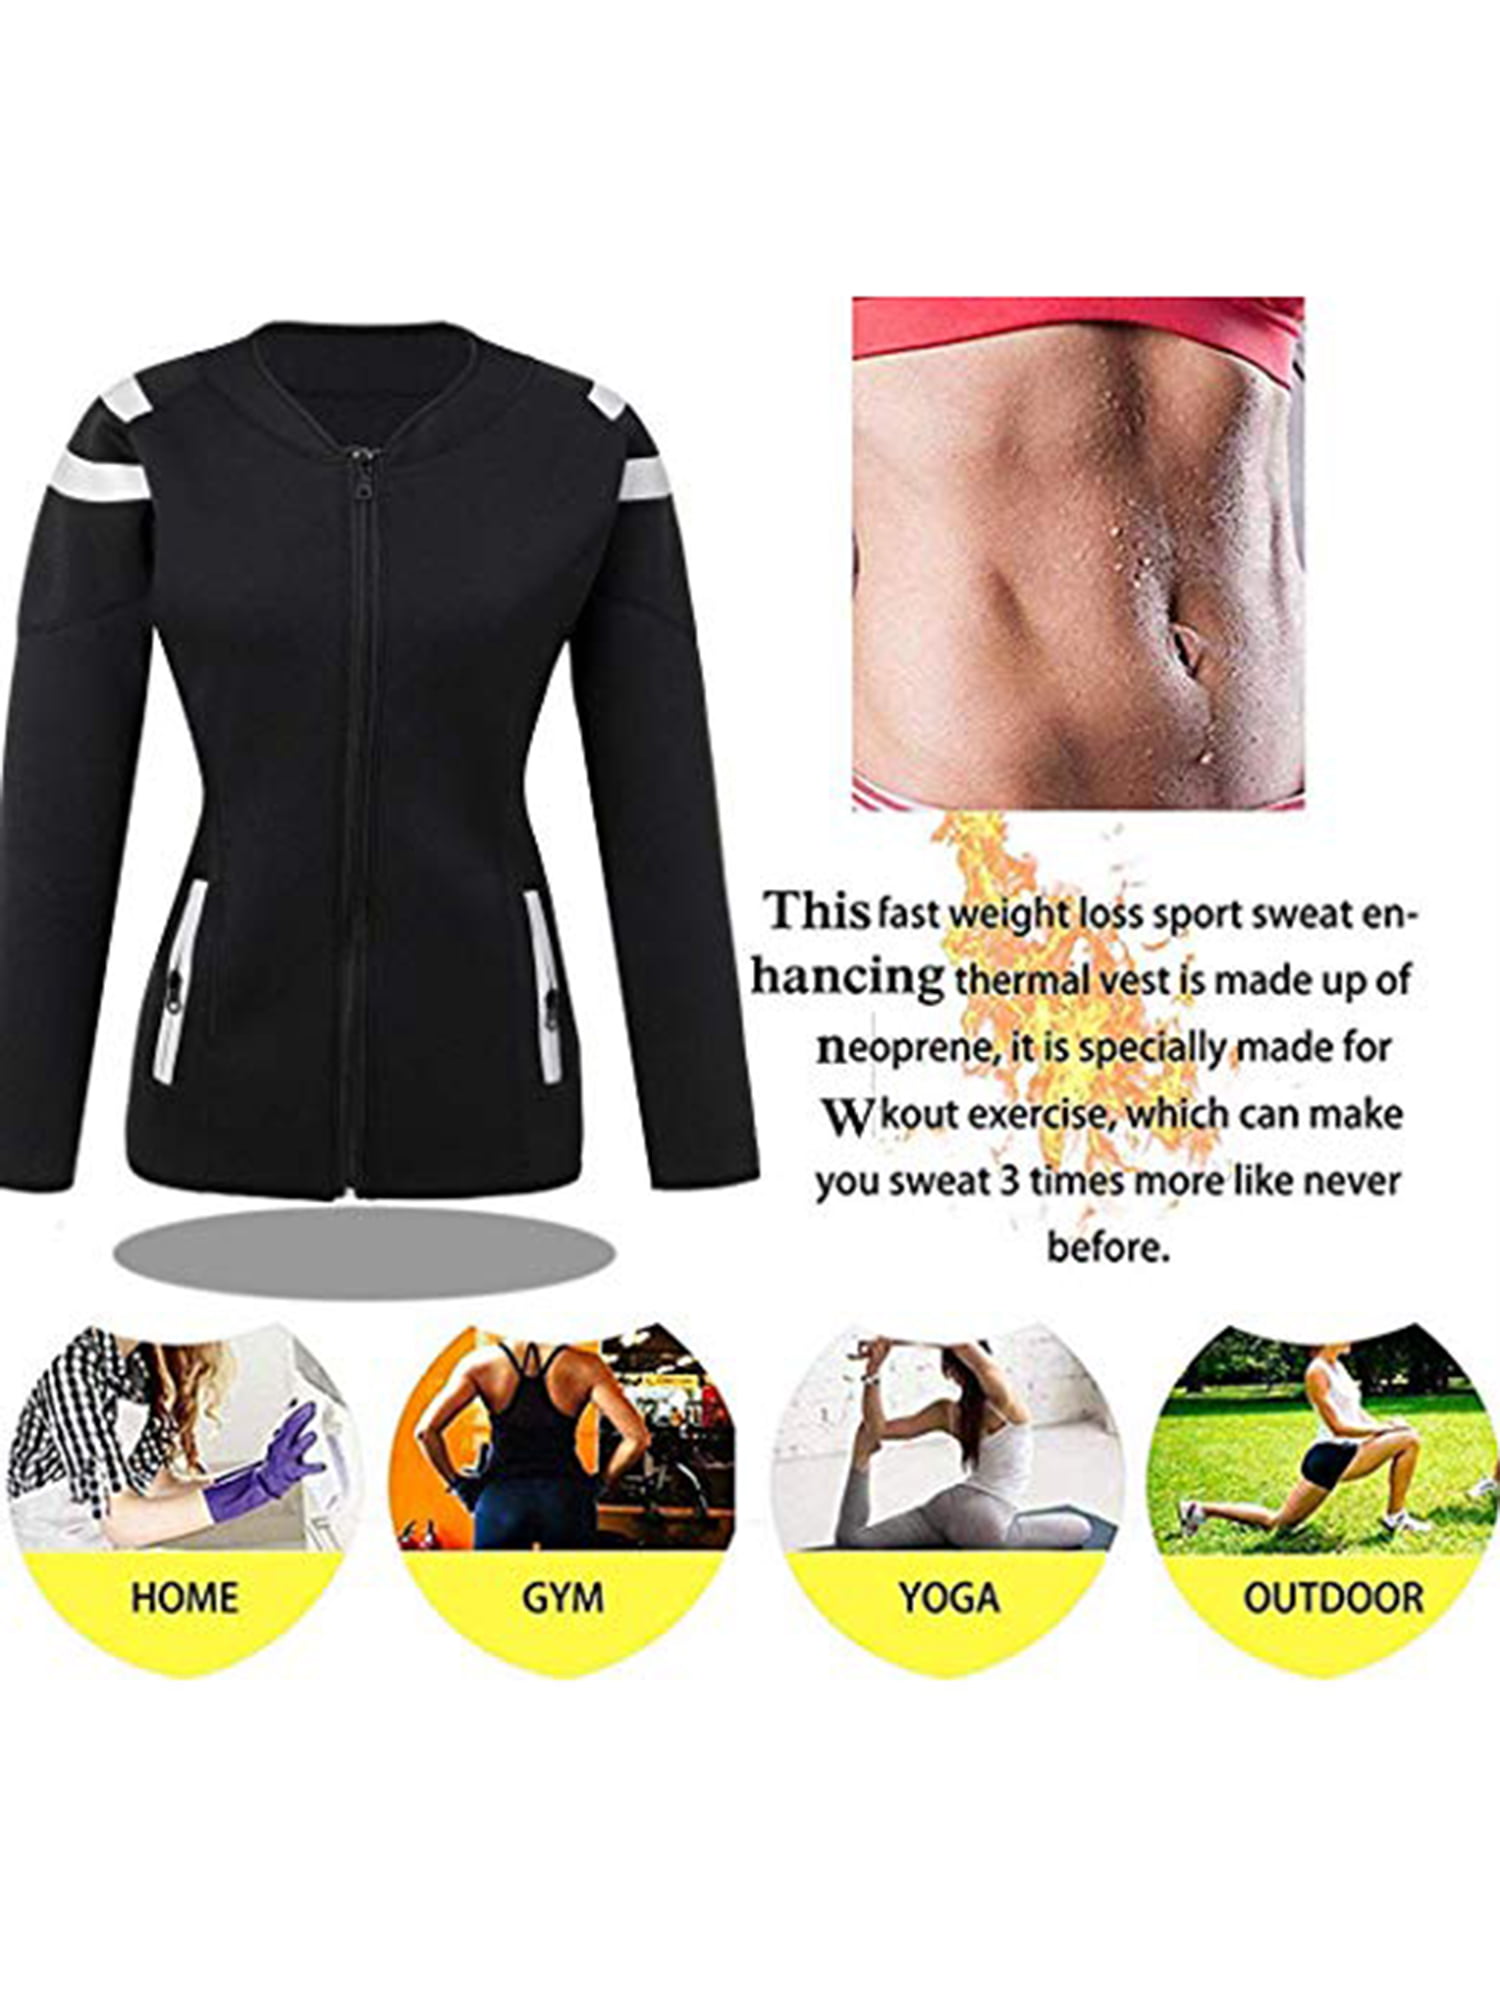 Femmes Minceur Sauna Sweat Suits Fat Burning Tops Taille Trainer Thermo  Legging Body Shaper Veste Shapewear-yvan